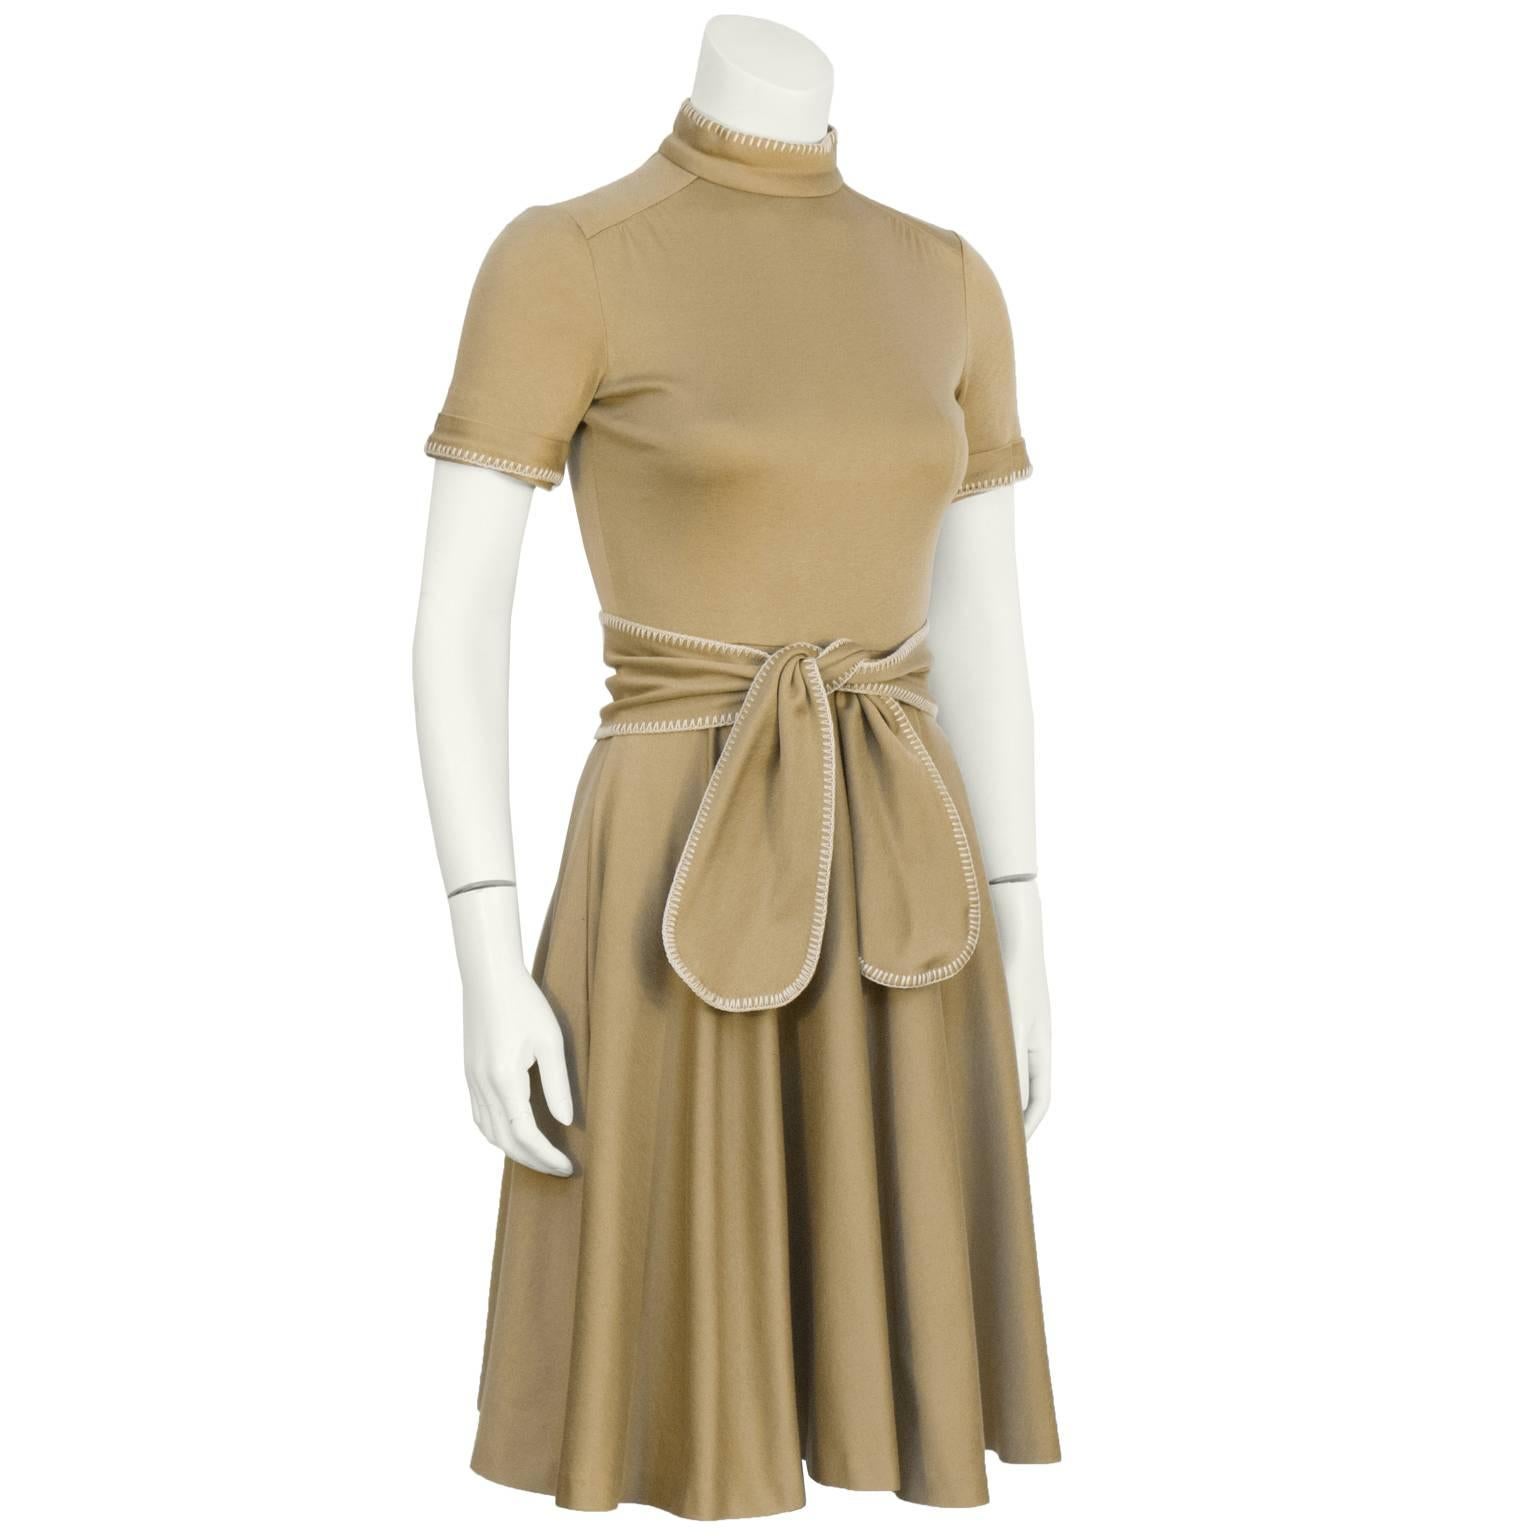 Geoffrey Beene 1970's brown cotton jersey mock turtleneck short sleeve dress with a circle skirt and matching belt. The dress features tonal whipstitch detail along the cuffs, neckline and belt. Zipper up the back and inseam pockets at the hips. In